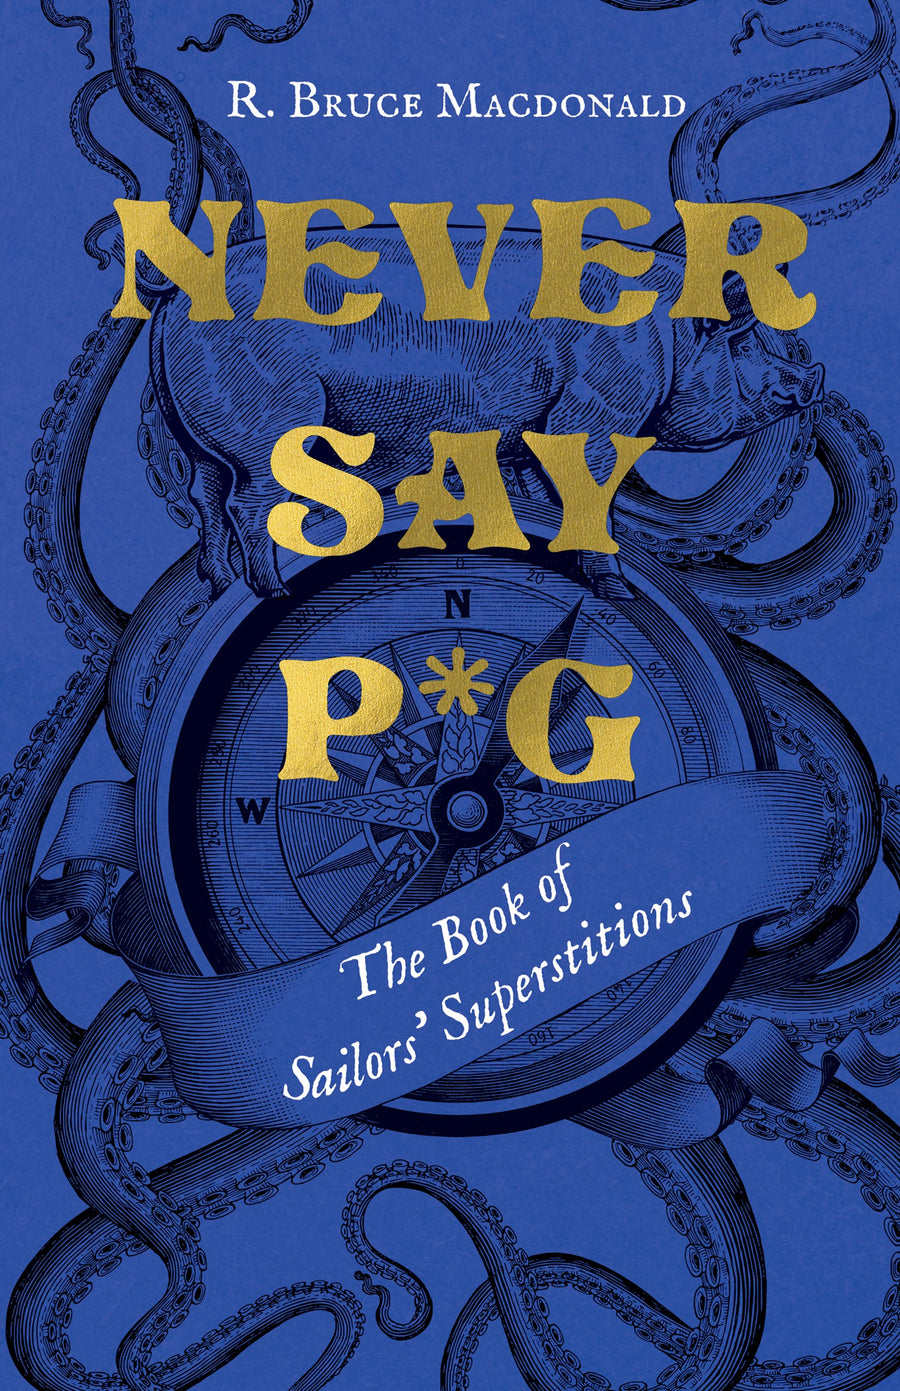 Never Say P*g : The Book of Sailors’ Superstitions